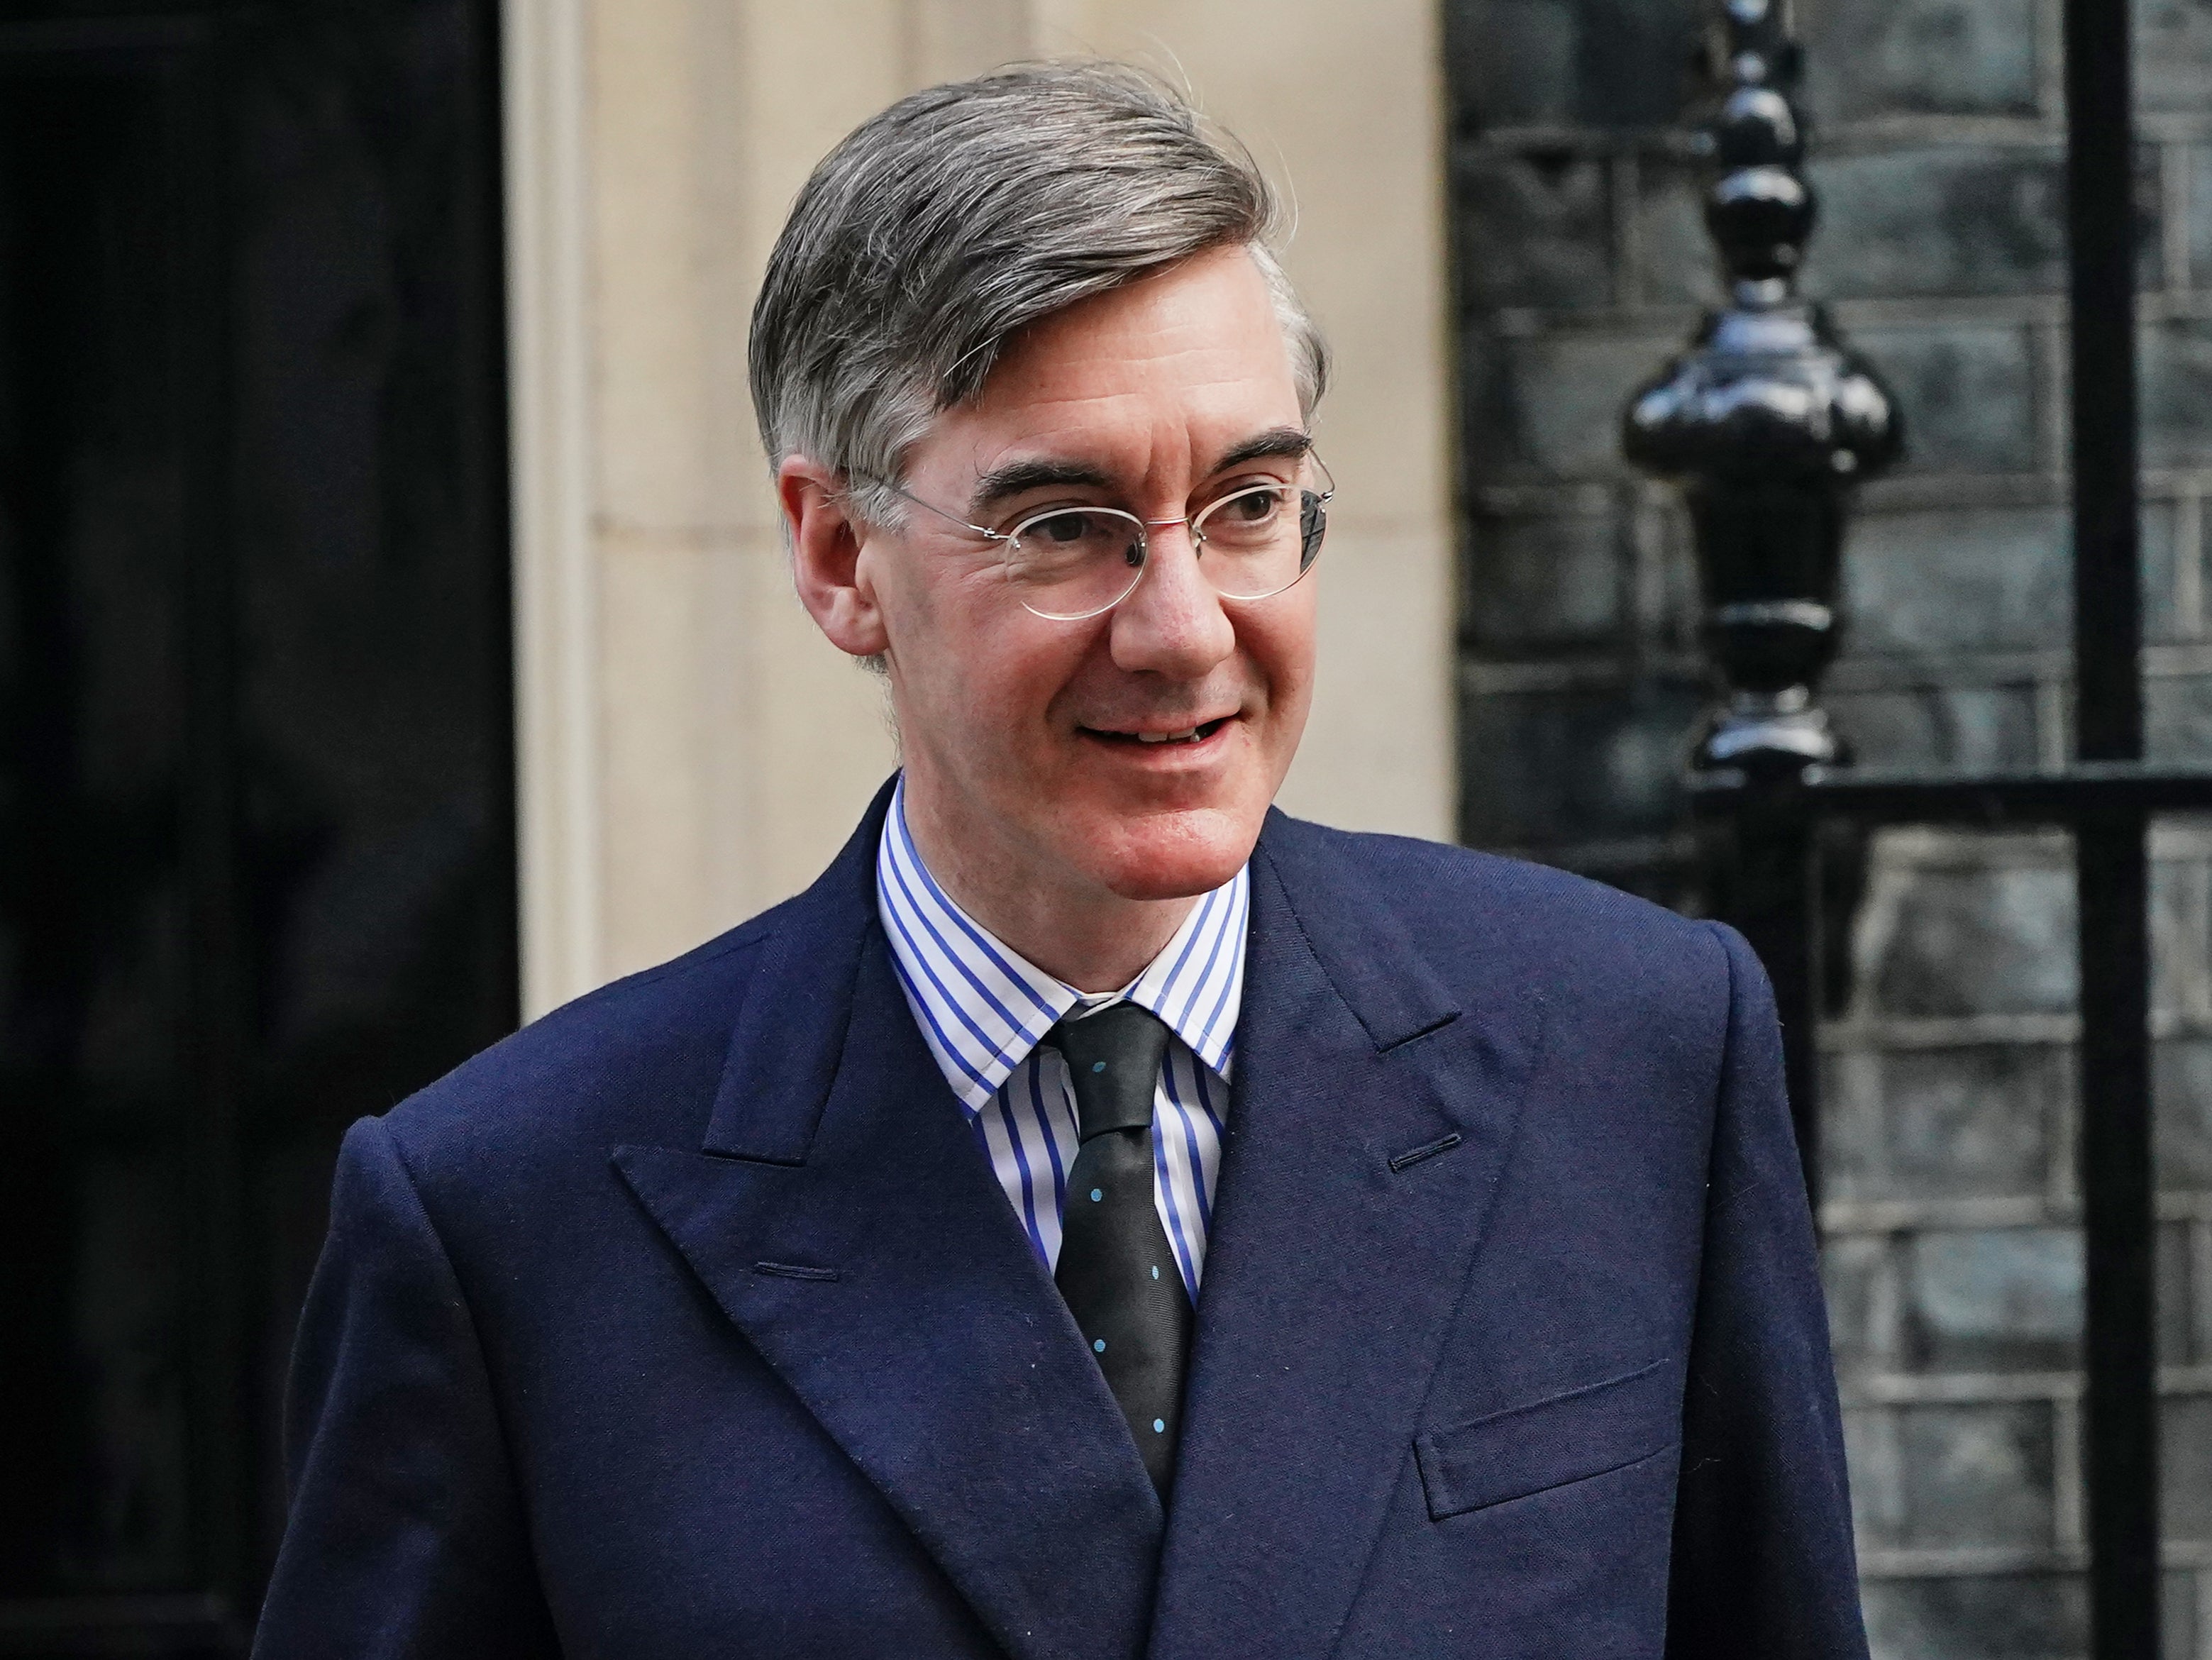 Efficiency minister Jacob Rees-Mogg wants to shrink civil service by a fifth